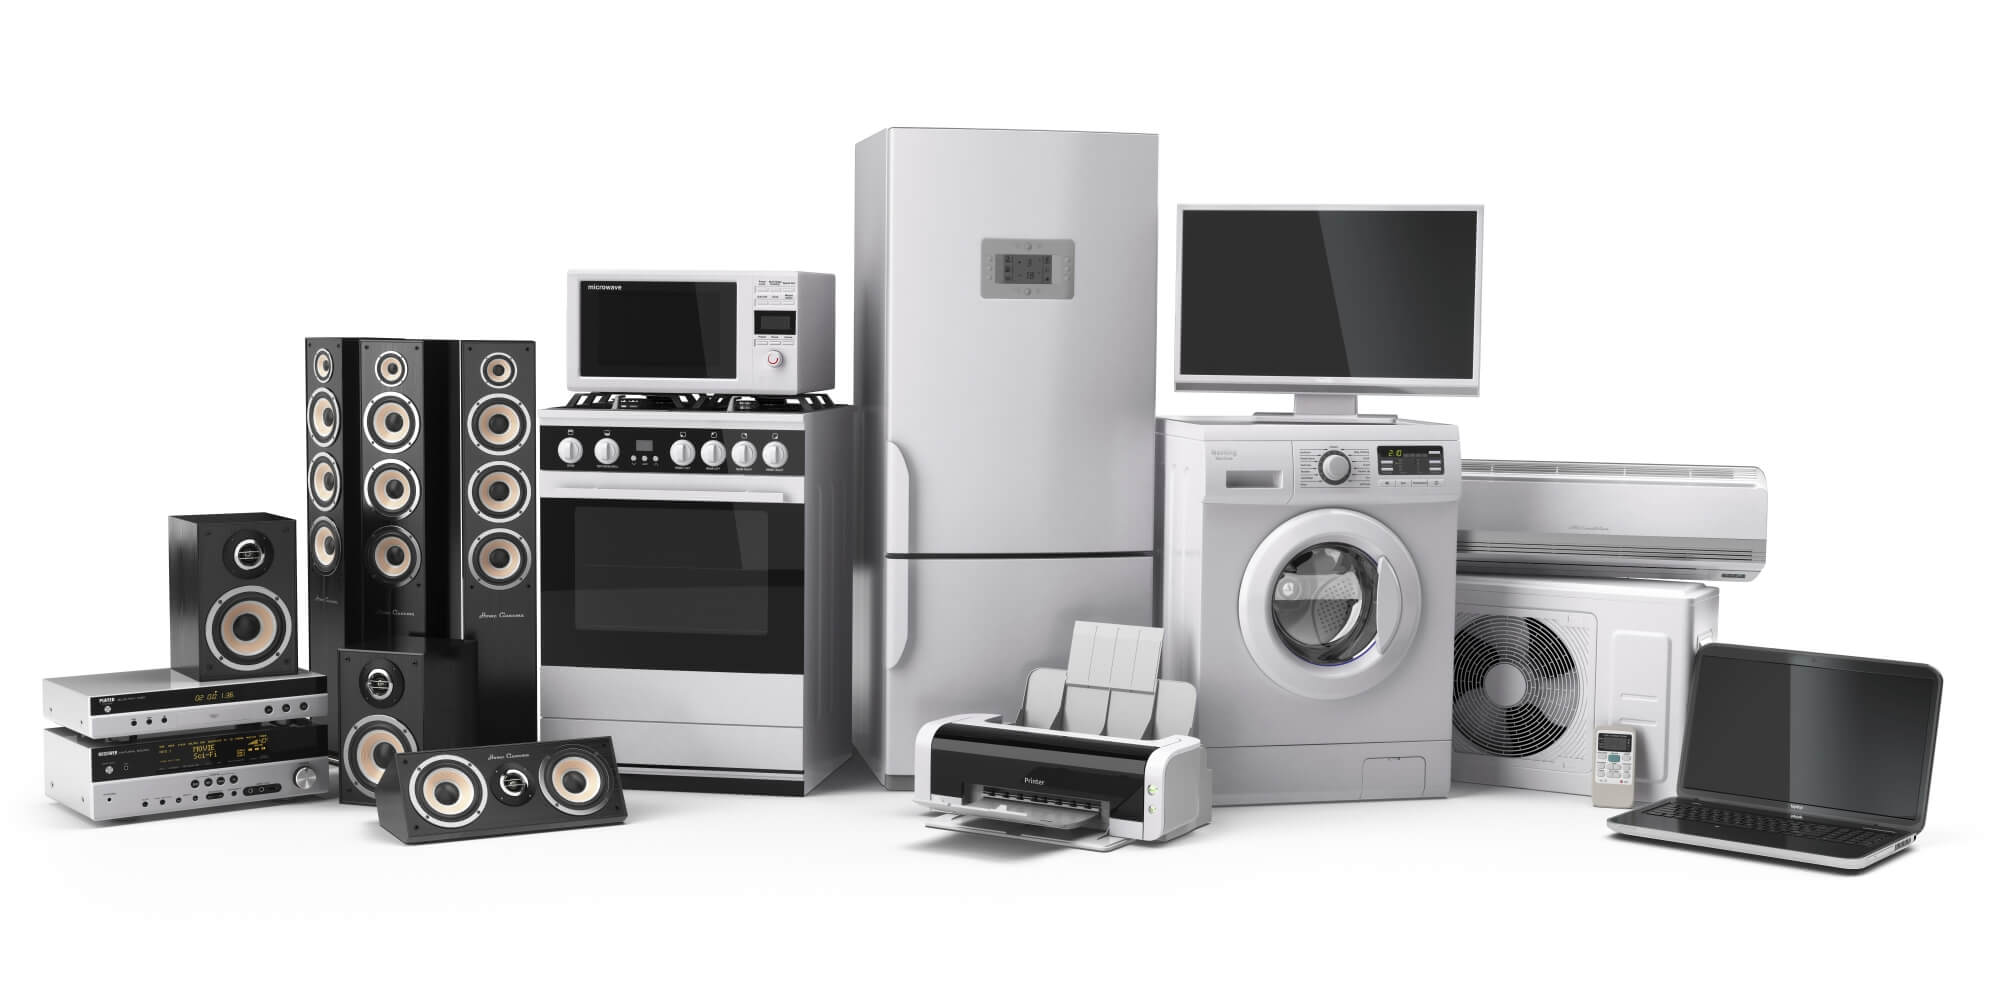 Local Oxford Appliance Installation Service Tewkesbury